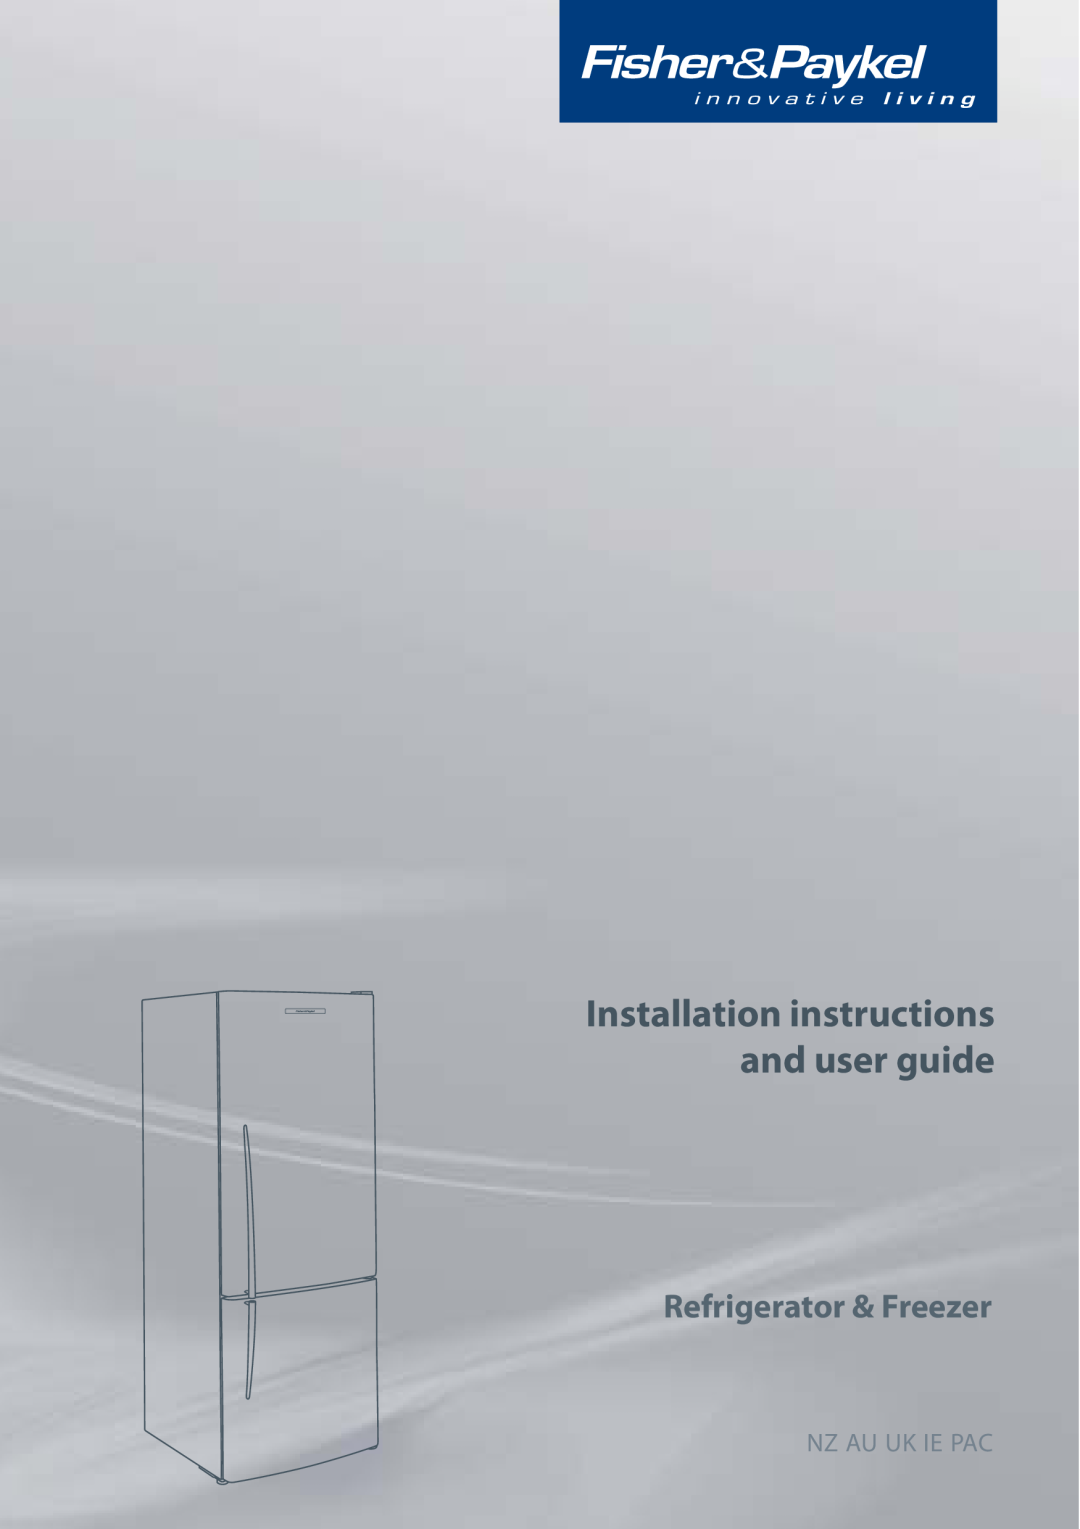 Fisher & Paykel E413T, E440T installation instructions Installation instructions and user guide, Refrigerator & Freezer 